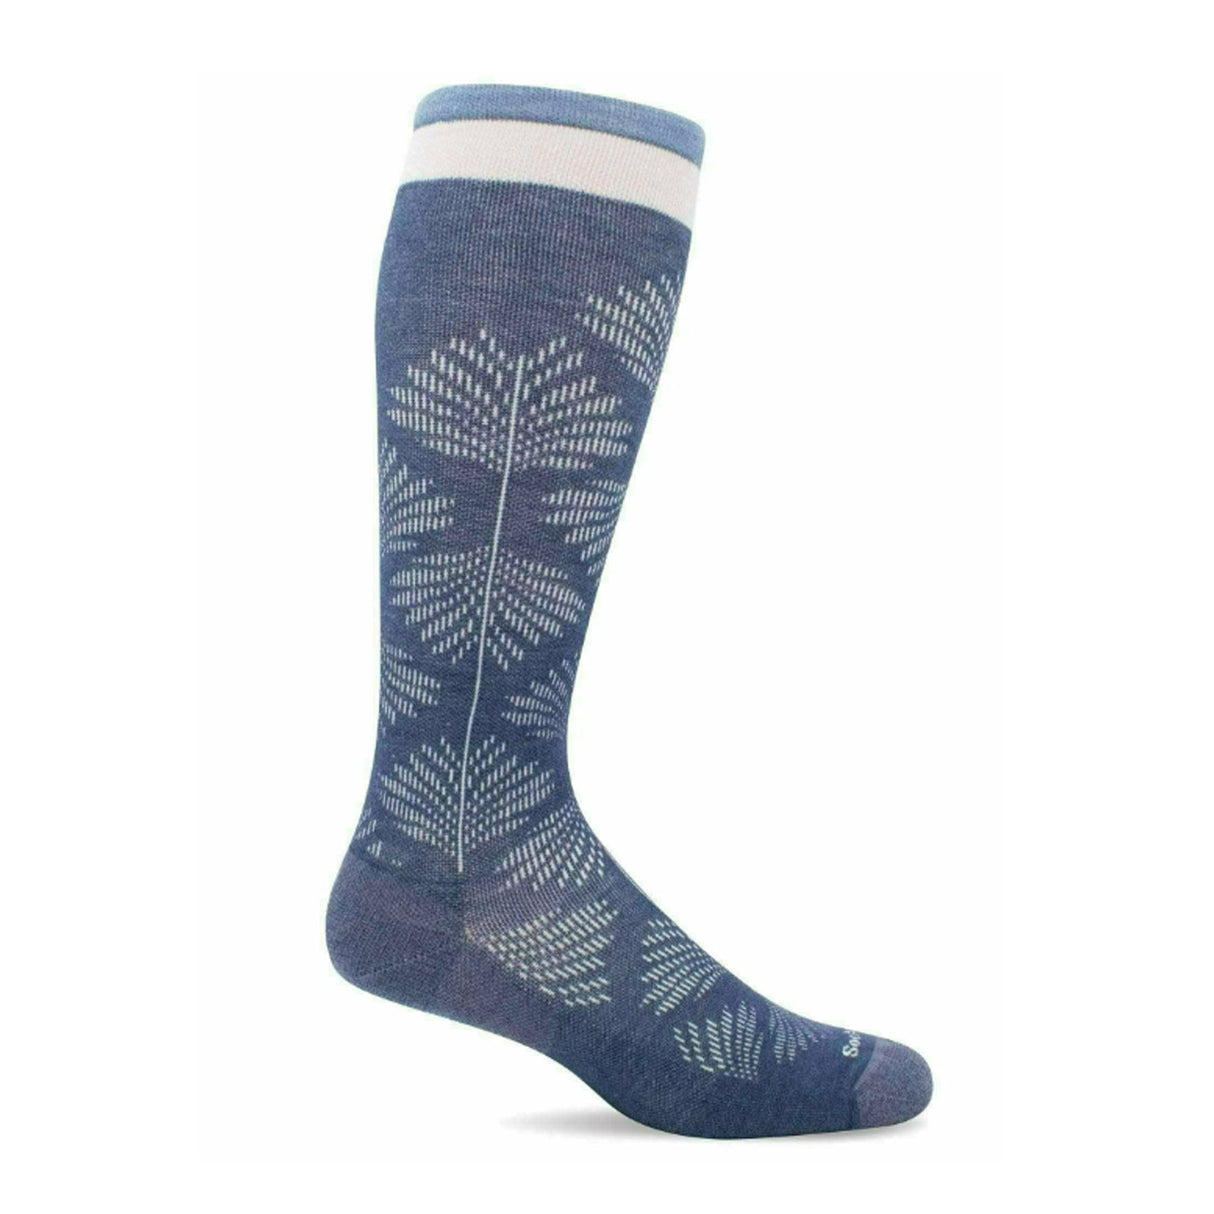 Sockwell Full Floral Over the Calf Compression Sock (Women) - Denim Accessories - Socks - Compression - The Heel Shoe Fitters